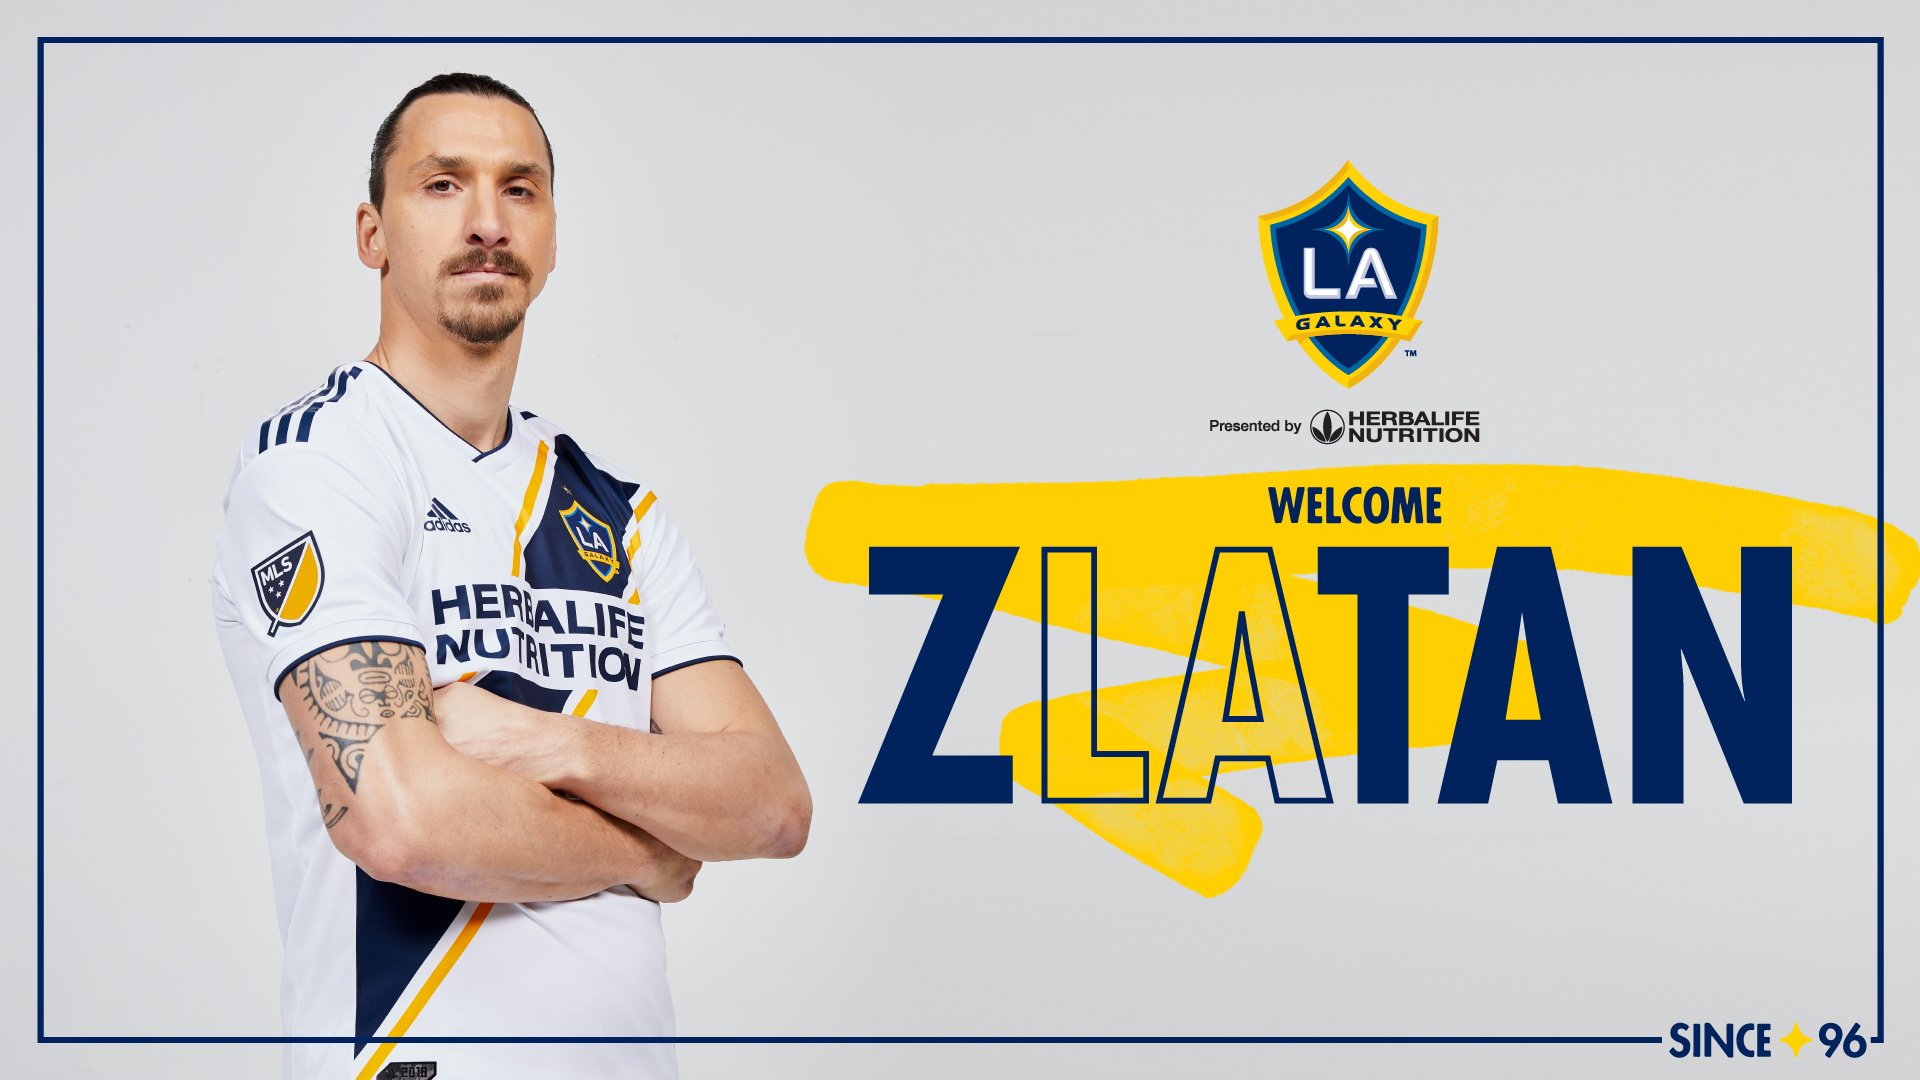 LA Galaxy on Confirmed Ibra official is a member of